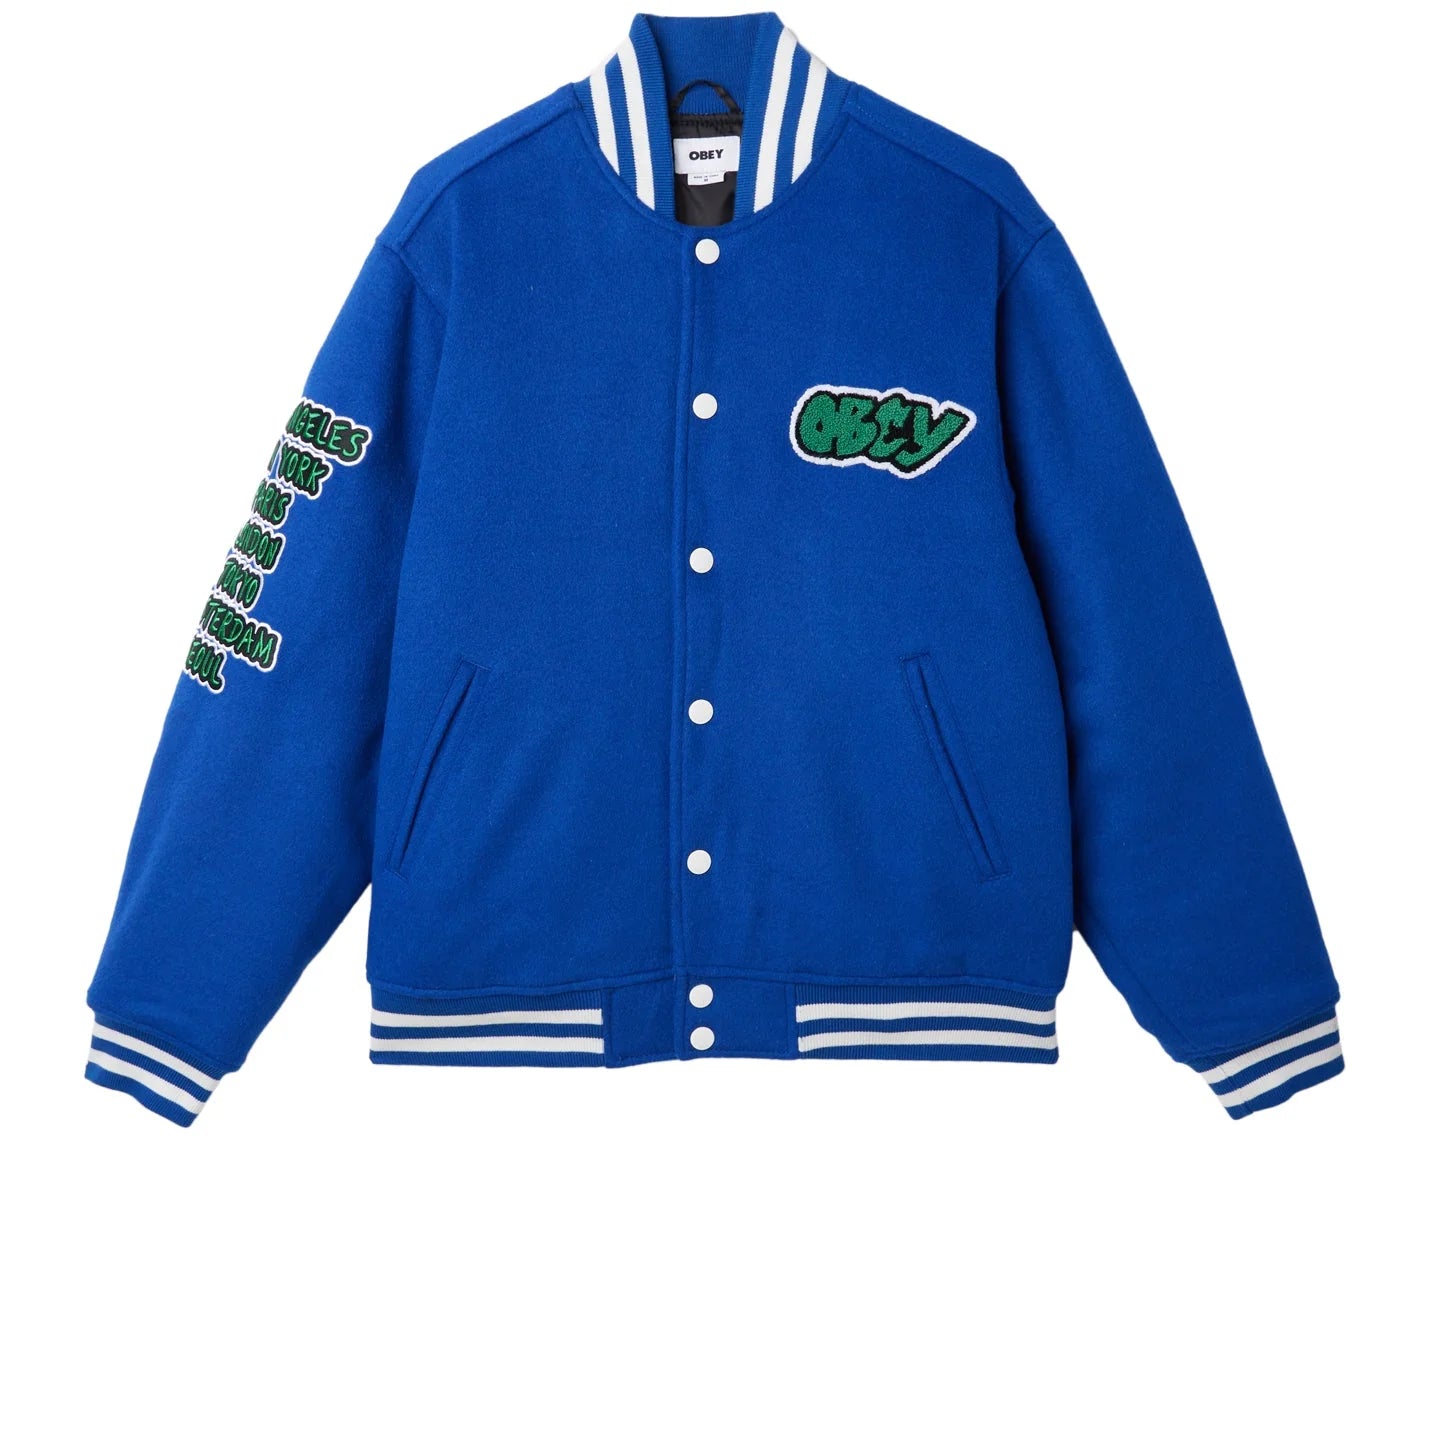 Obey Roll Call Varsity Jacket Surf Blue